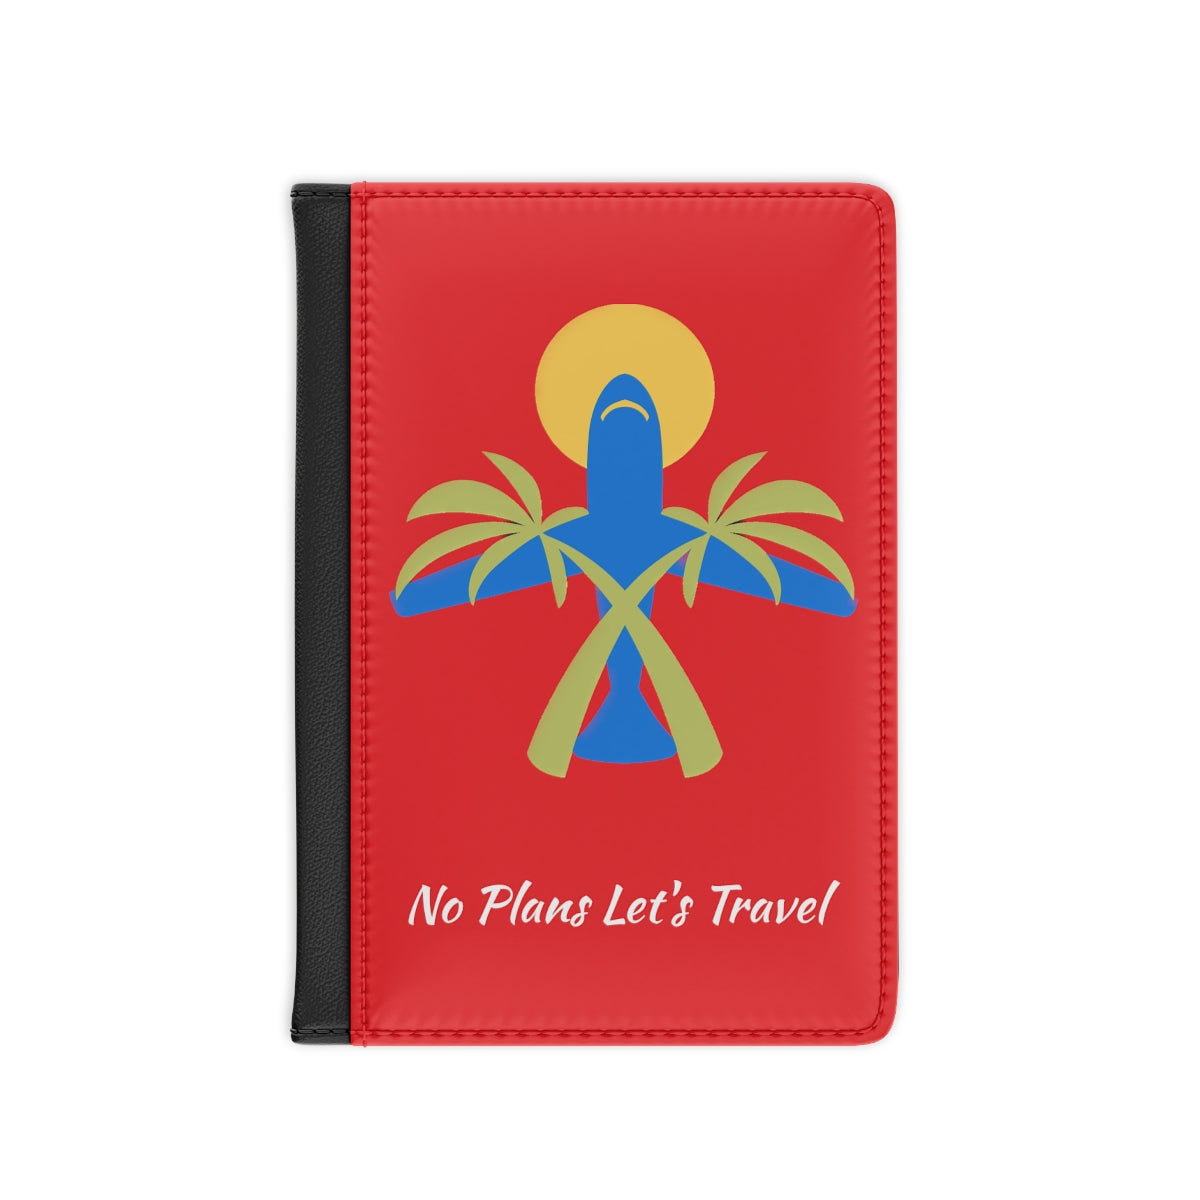 (Red) No Plans Let's Travel Passport Cover